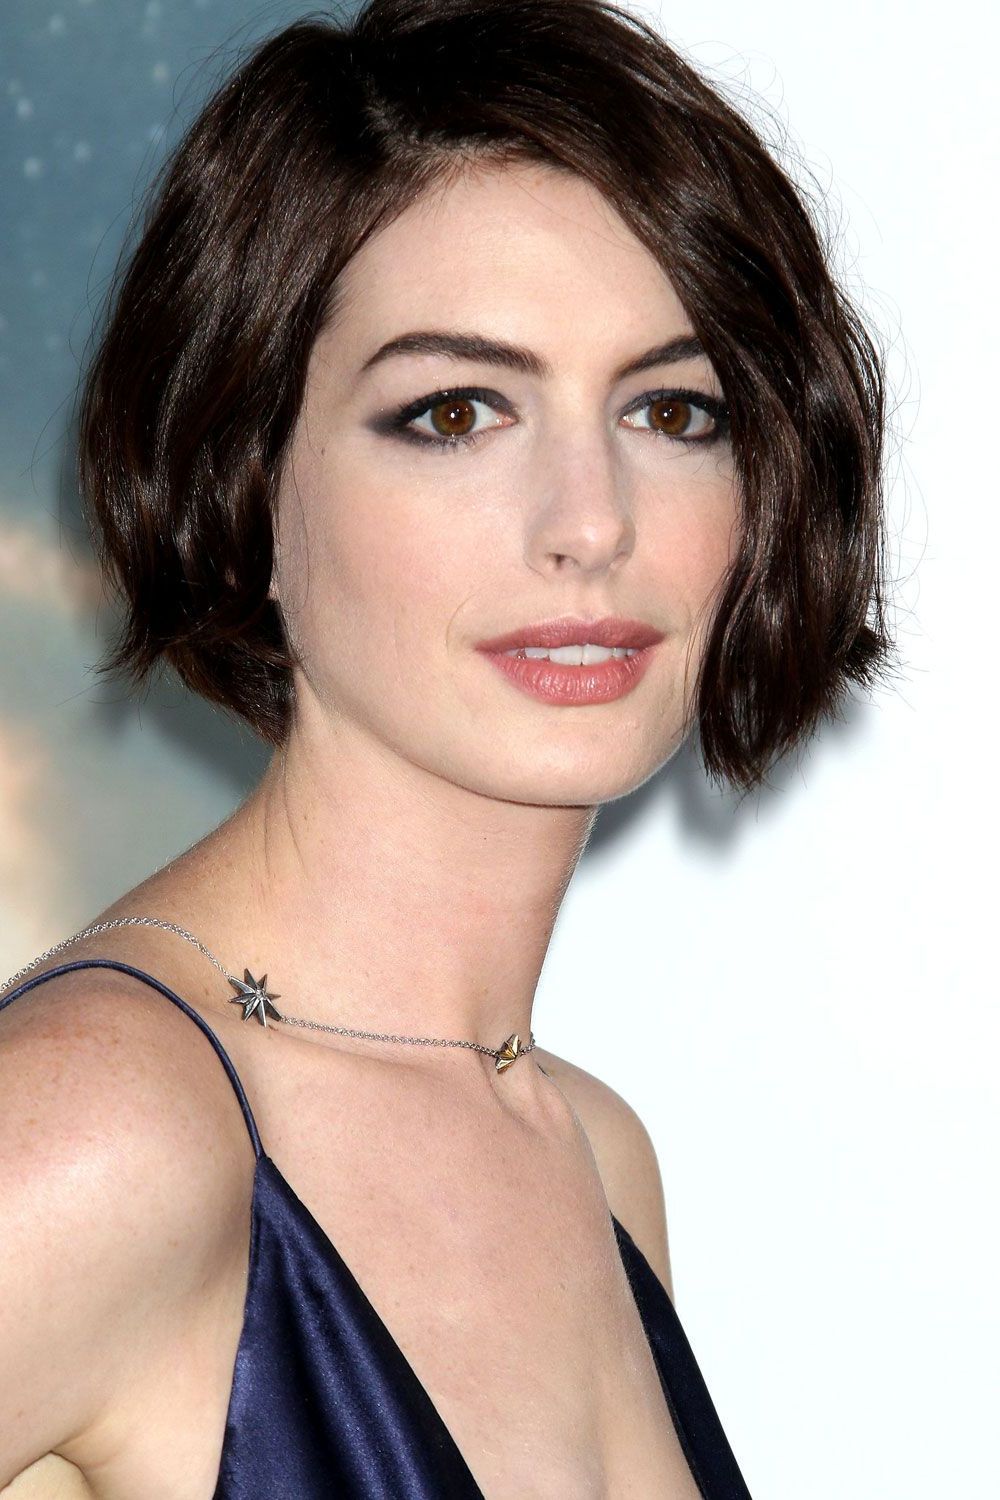 Hairstyles For Short Hair That'll Inspire You To Chop Off Your Locks With Regard To Anne Hathaway Short Hairstyles (View 7 of 25)